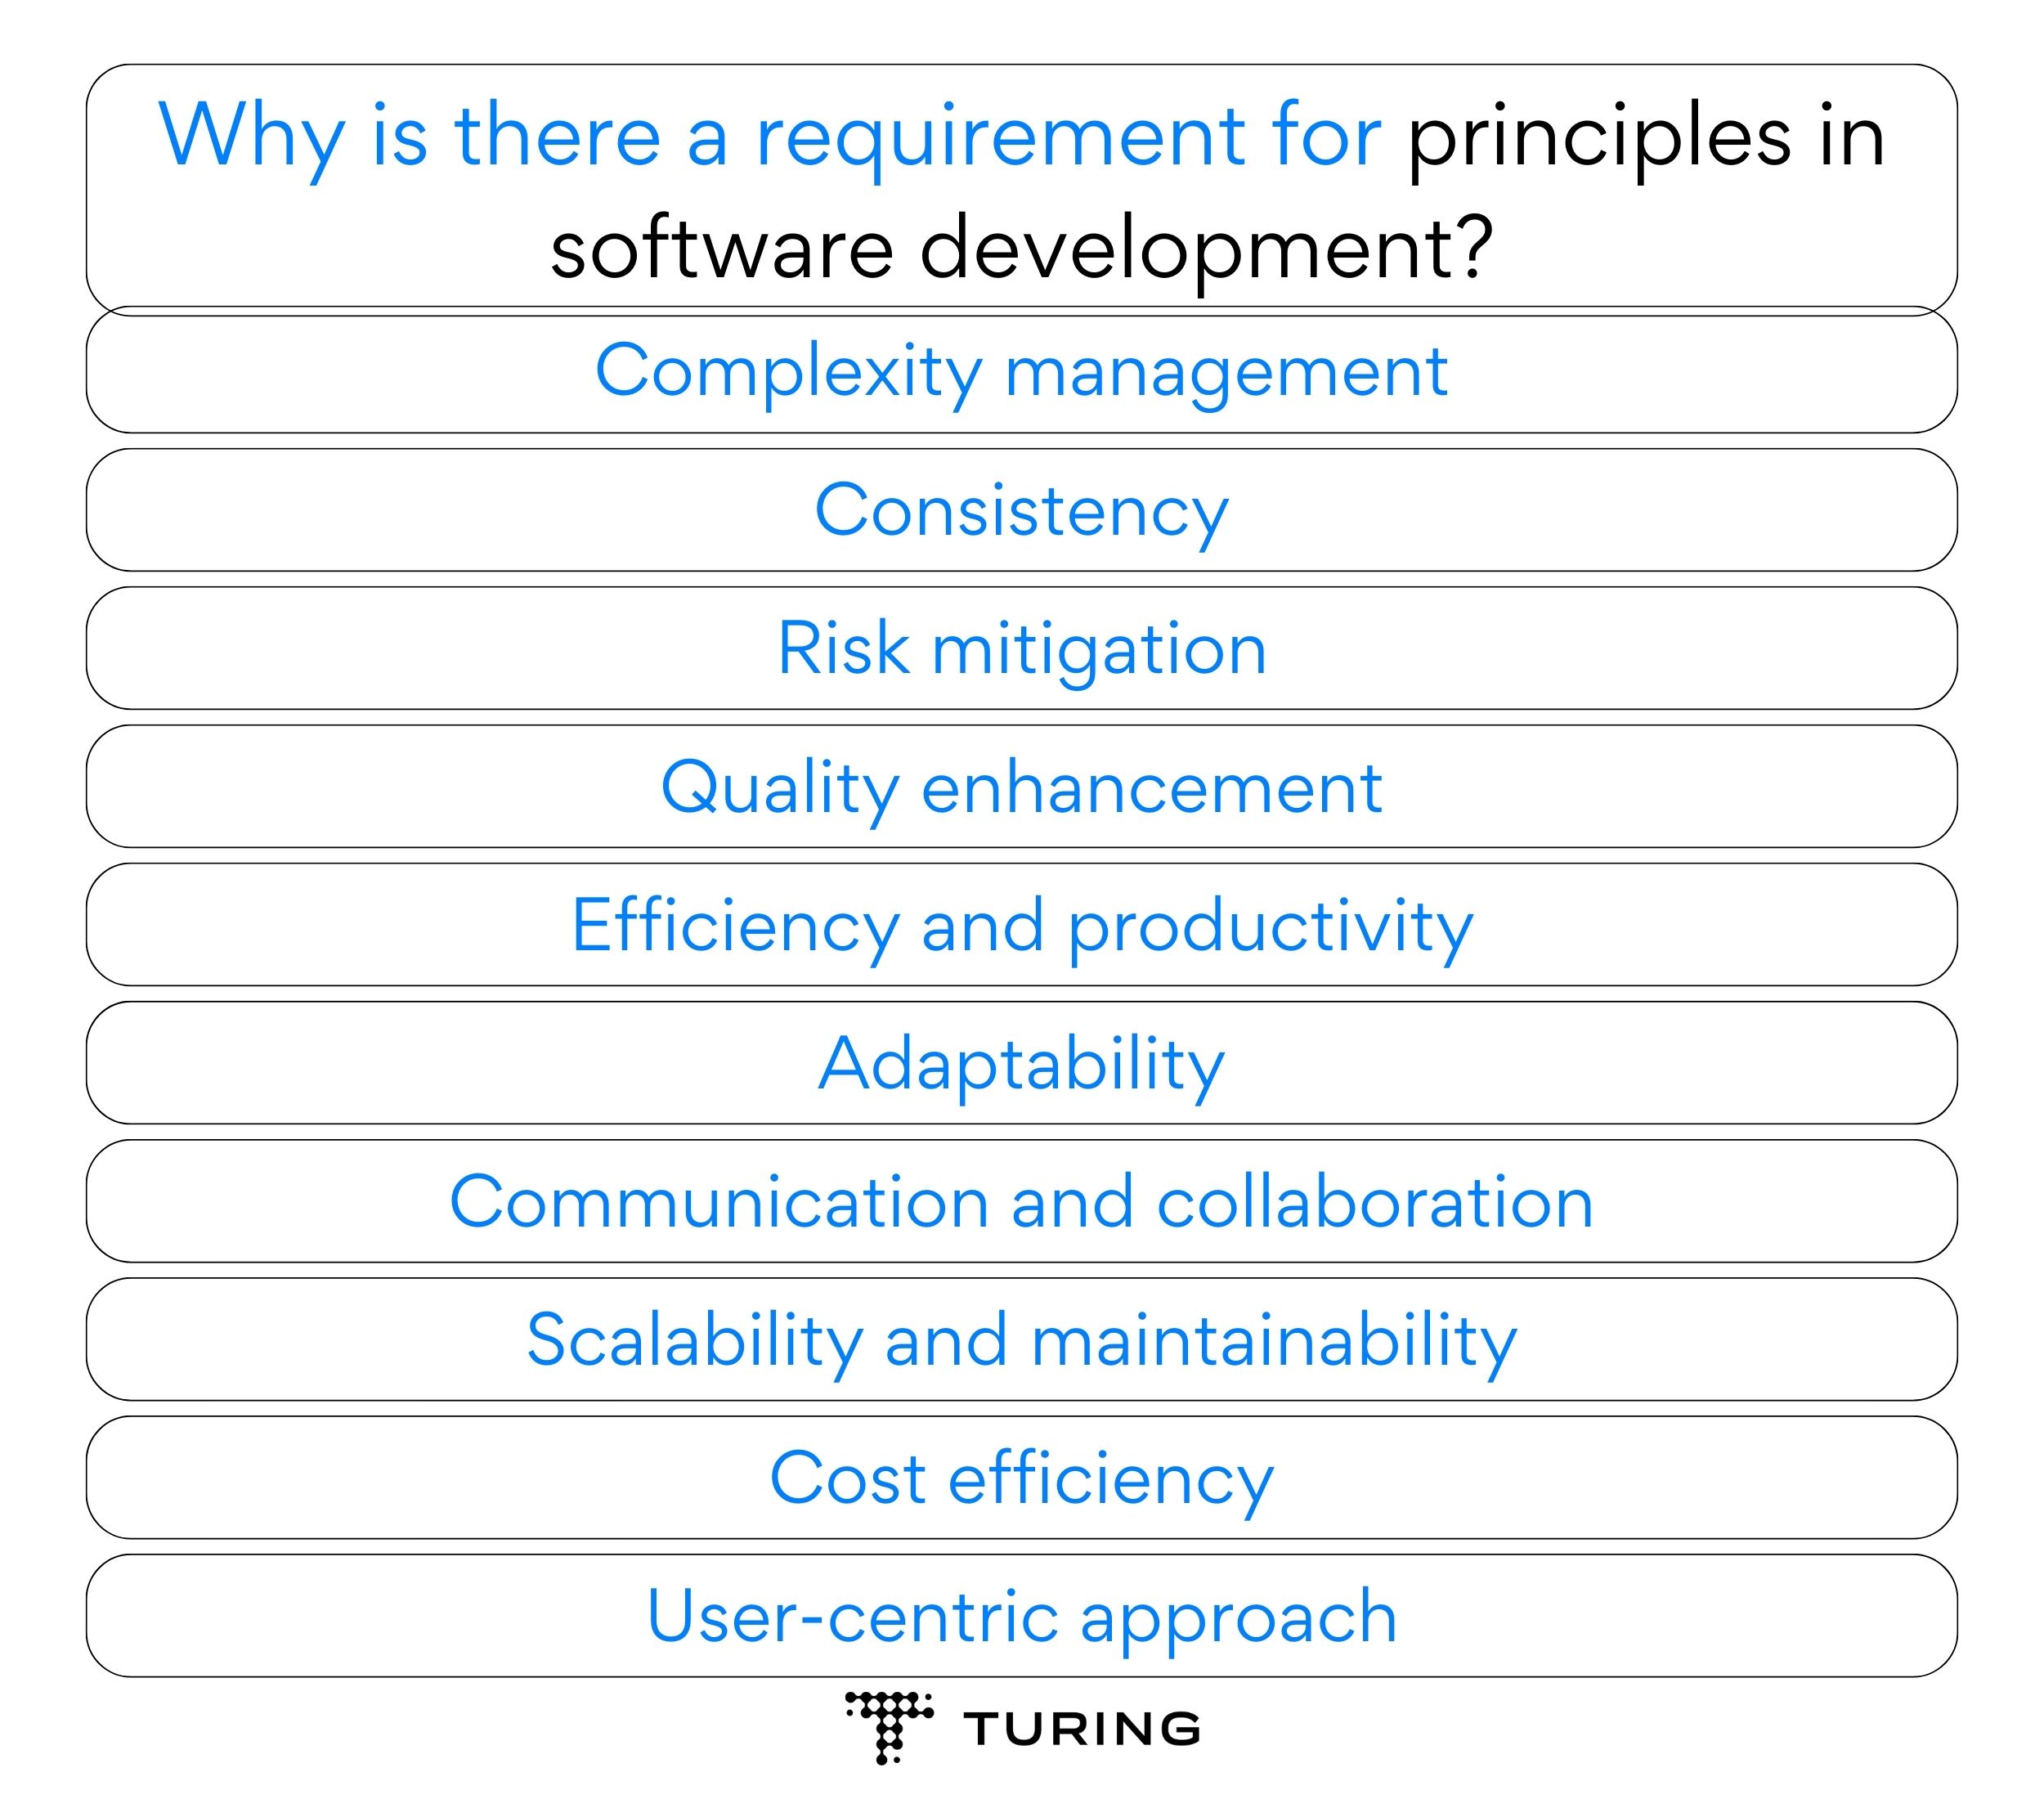 Why is there a requirement for principles in software development?